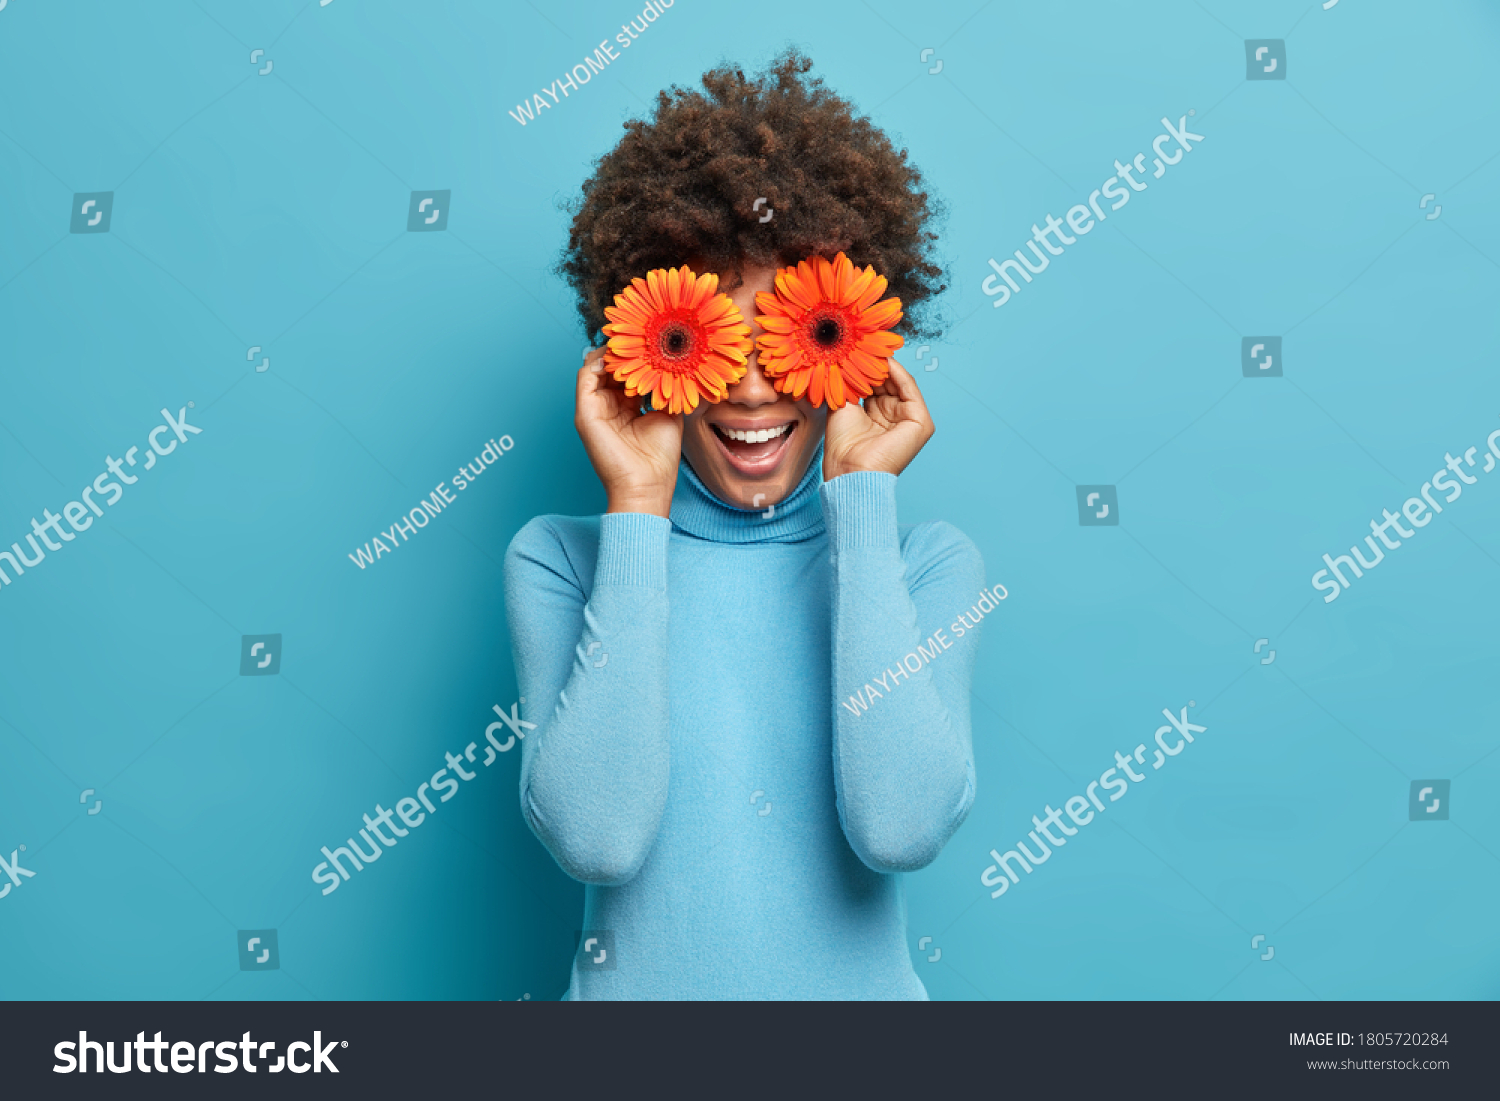 Playful positive African American woman covers eyes with two orange gerberas, enjoys spring time, fresh flowers, has fun, dressed casually, isolated on blue background. Happy florist indoor. #1805720284